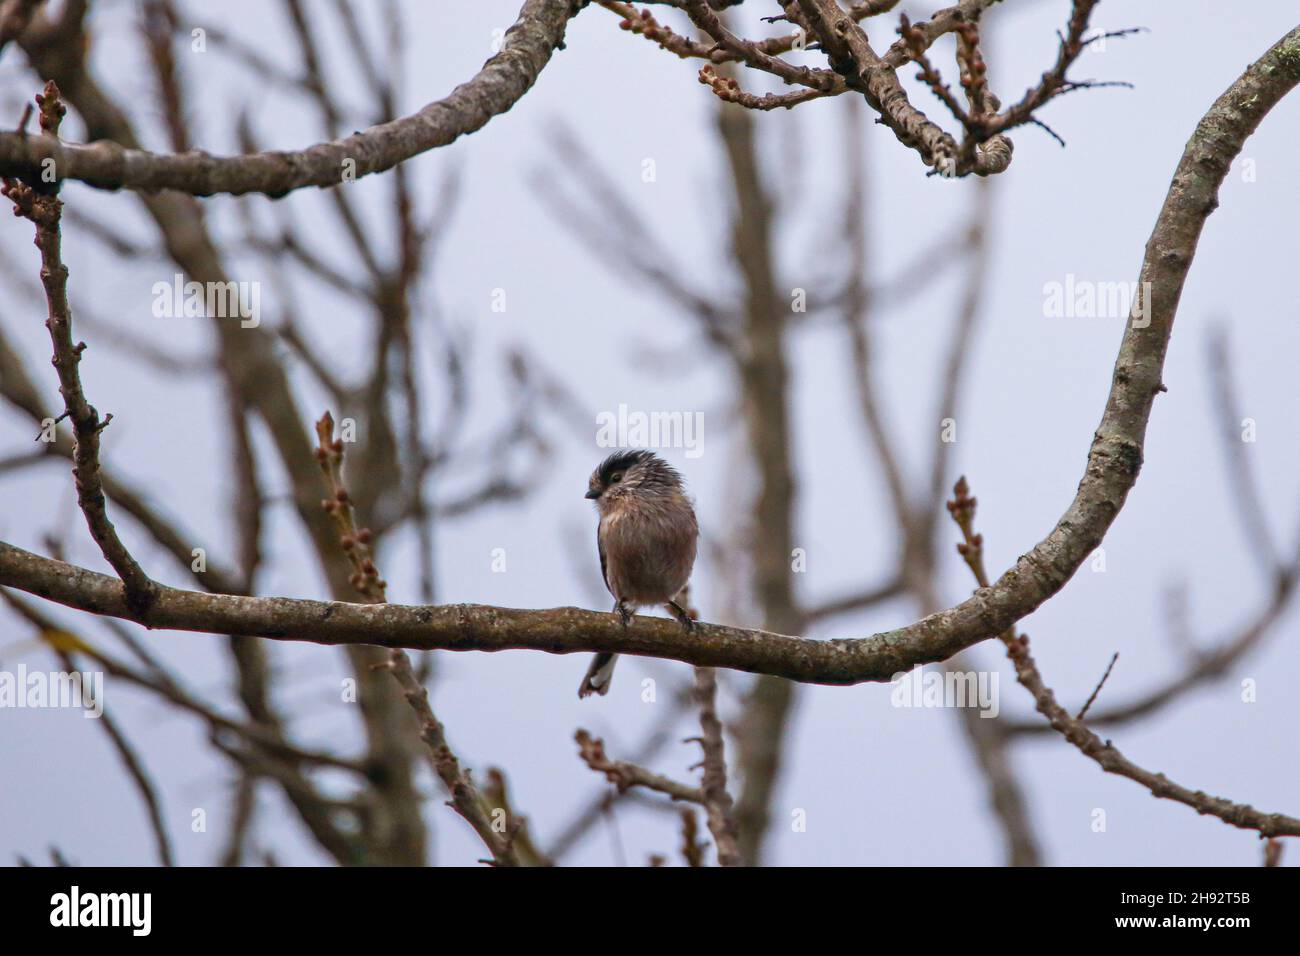 A long-tailed tit - Aegithalos caudatus perched on a twig Stock Photo